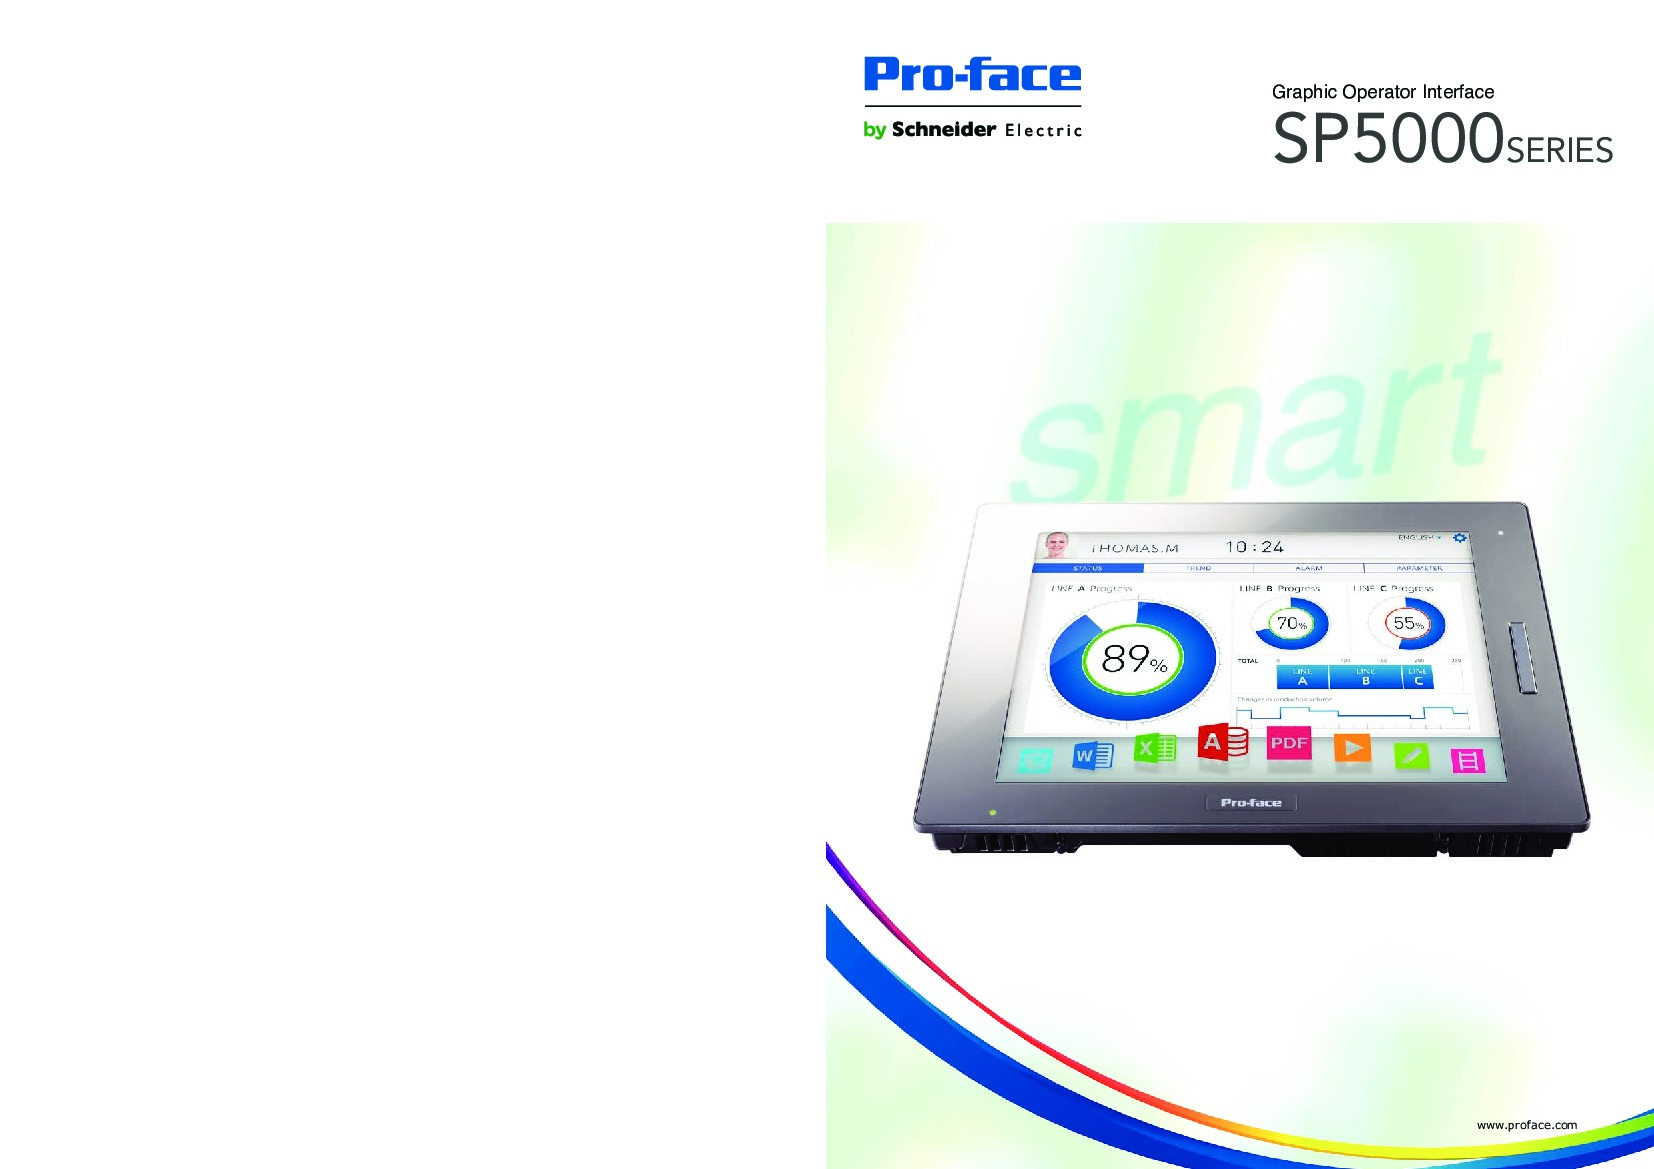 First Page Image of PFXSP5700TPD Pro-face SP5000 Catalog.pdf